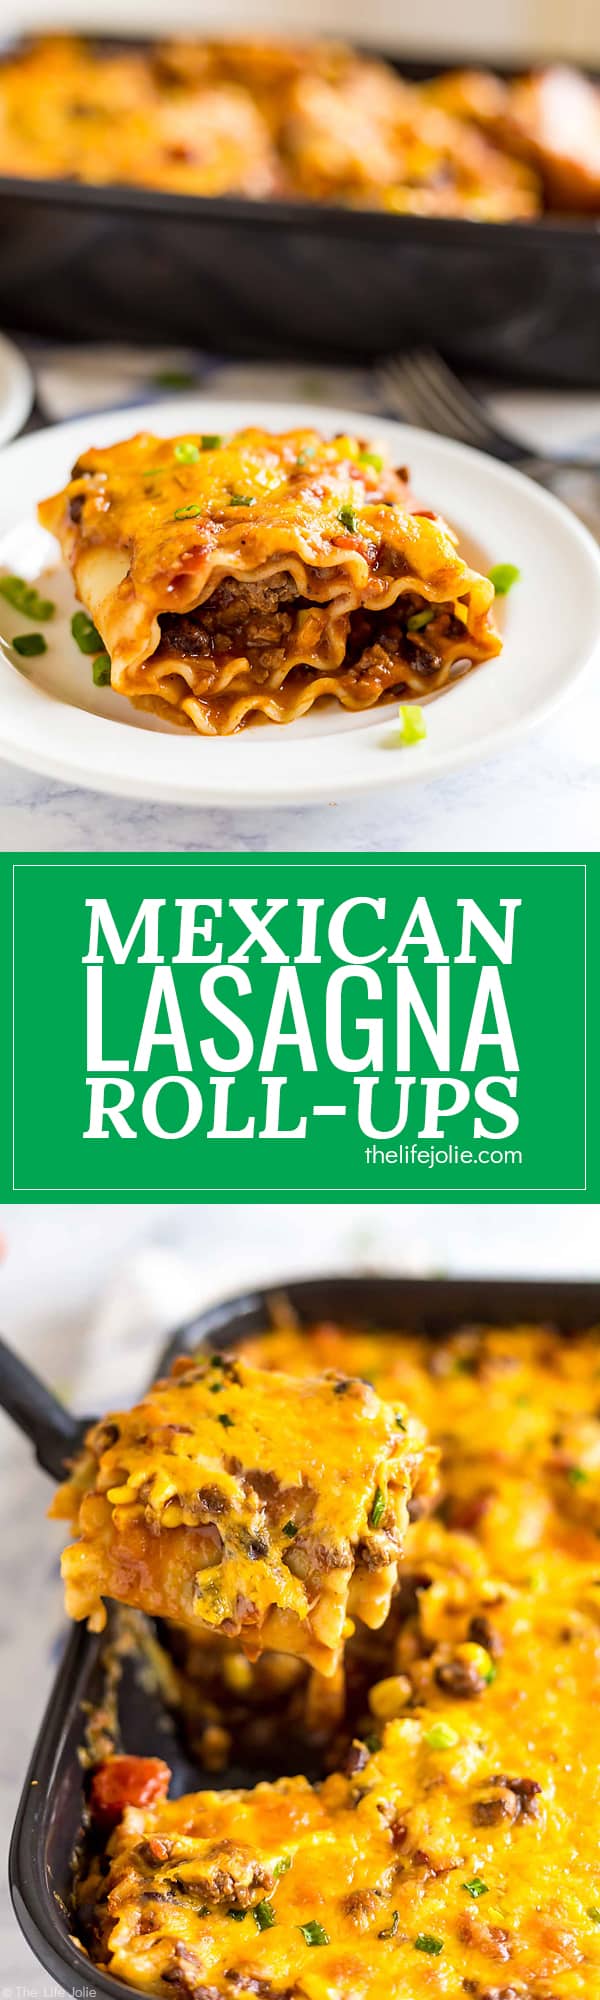 Mexican Lasagna Roll-ups are a delicious combination of two family favorites: Lasagna and Tacos. This is an easy recipe featuring meat, cheese, beans, corn, tomatoes and rolled up in lasagna noodles. They're total comfort food and great for when you're cooking for family and friends!